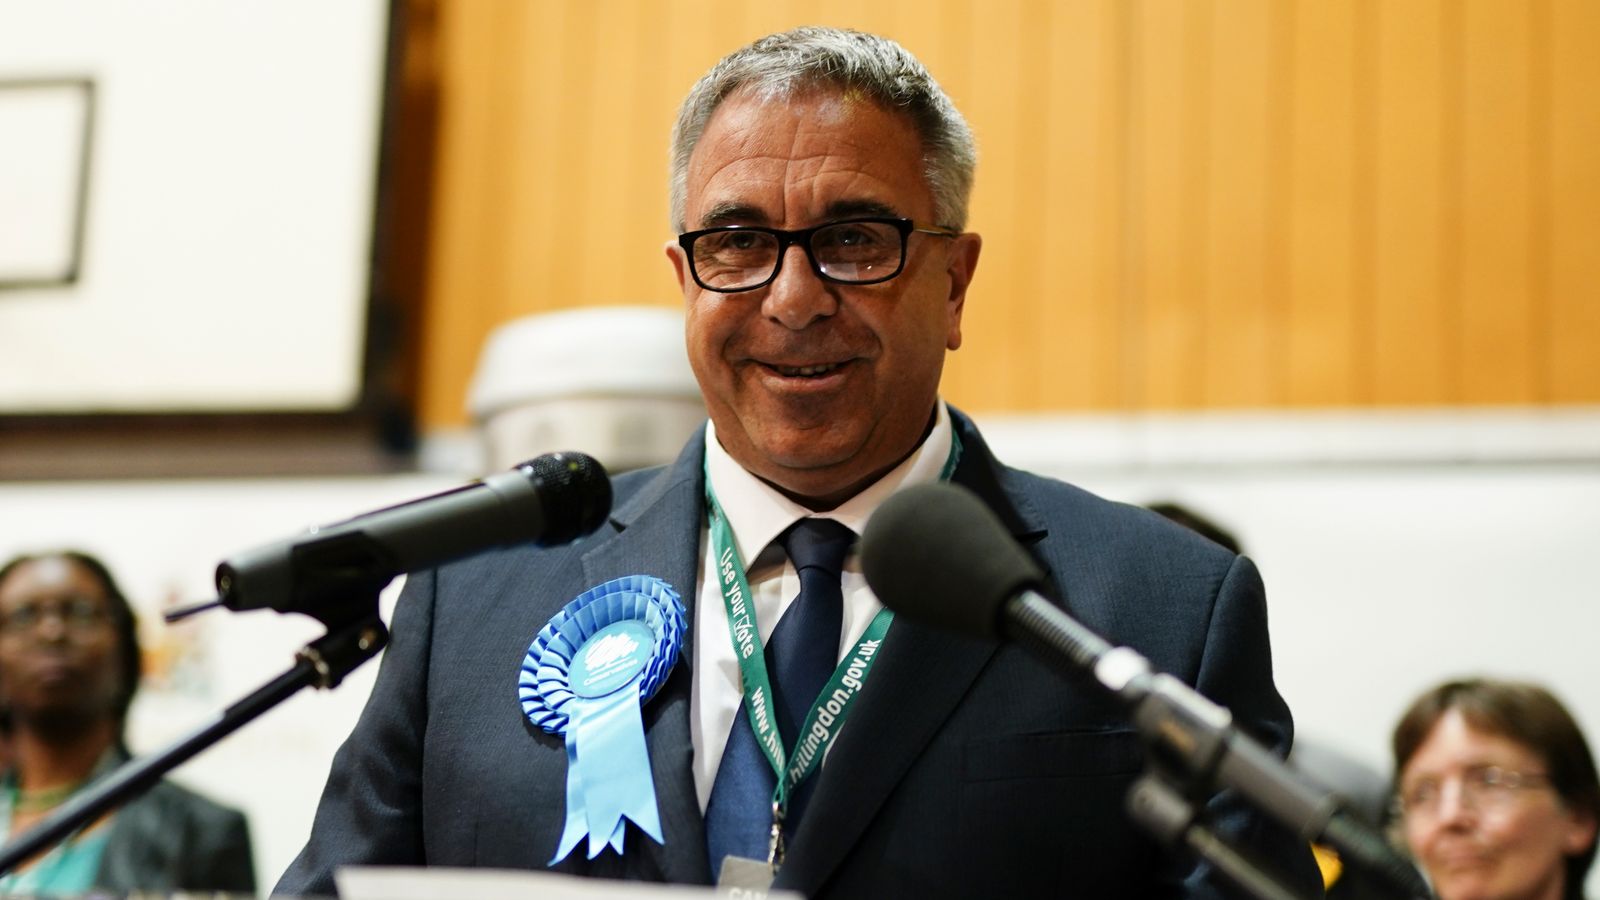 2023 by-elections: Conservatives hold Boris Johnson's old seat of Uxbridge and South Ruislip